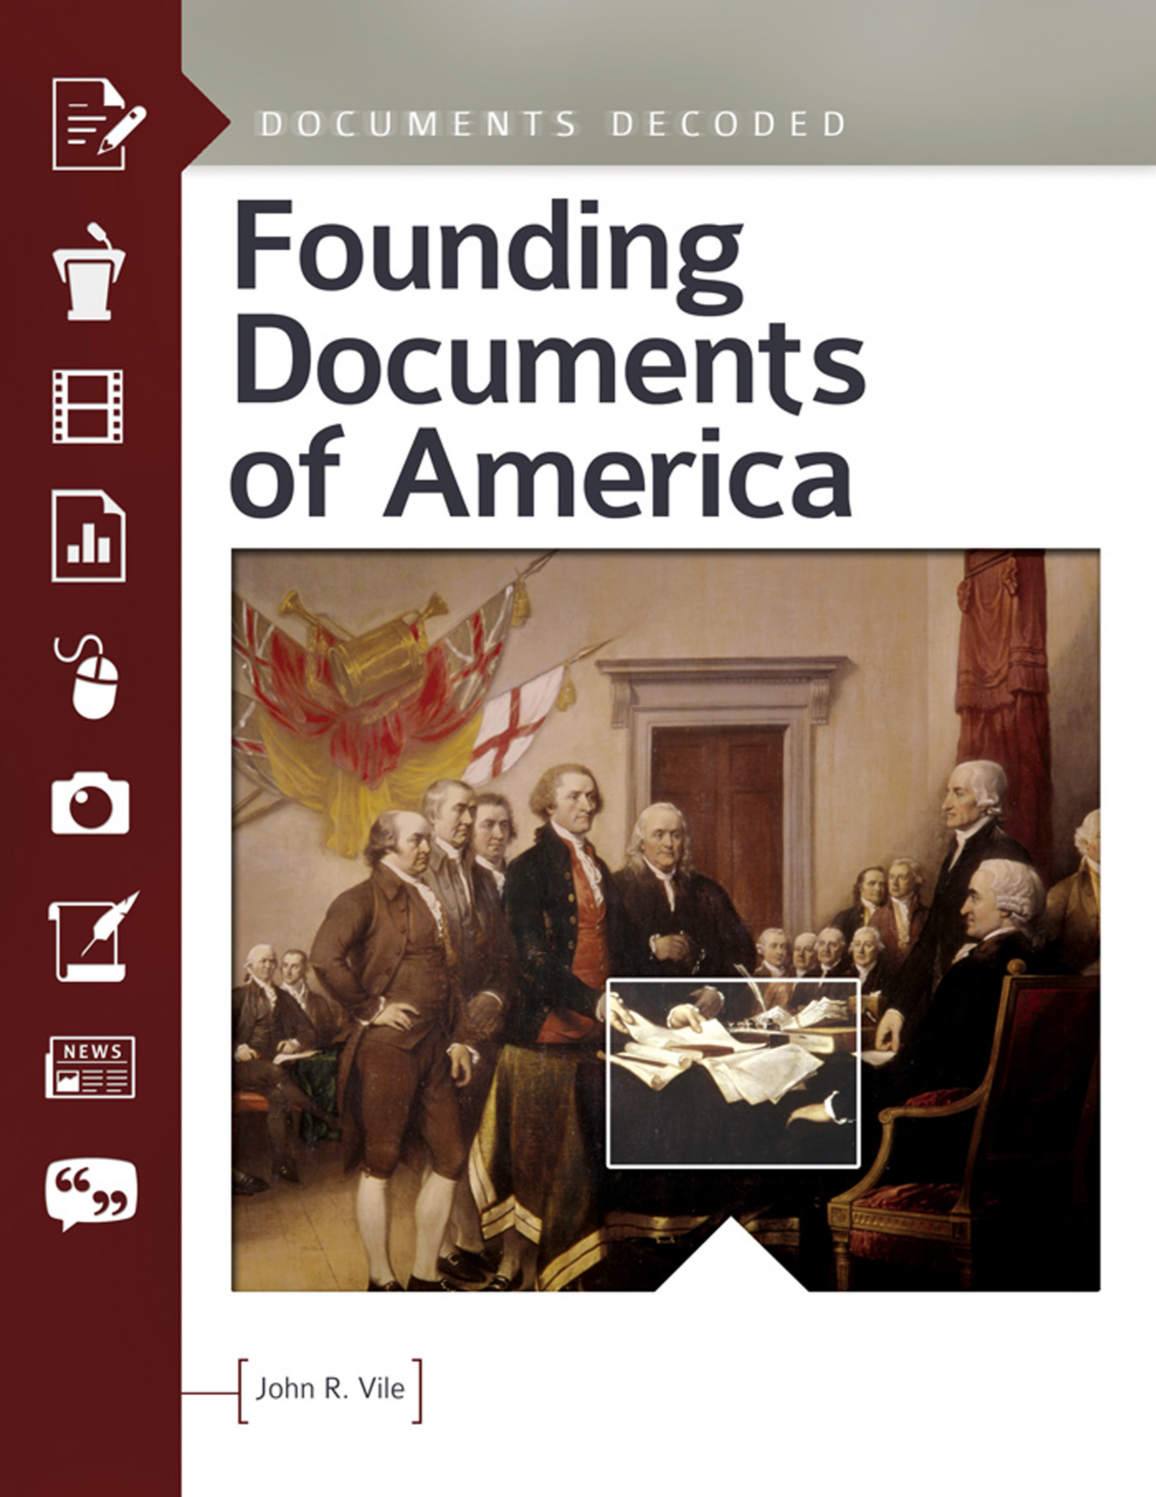 Founding Documents of America: Documents Decoded page Cover1